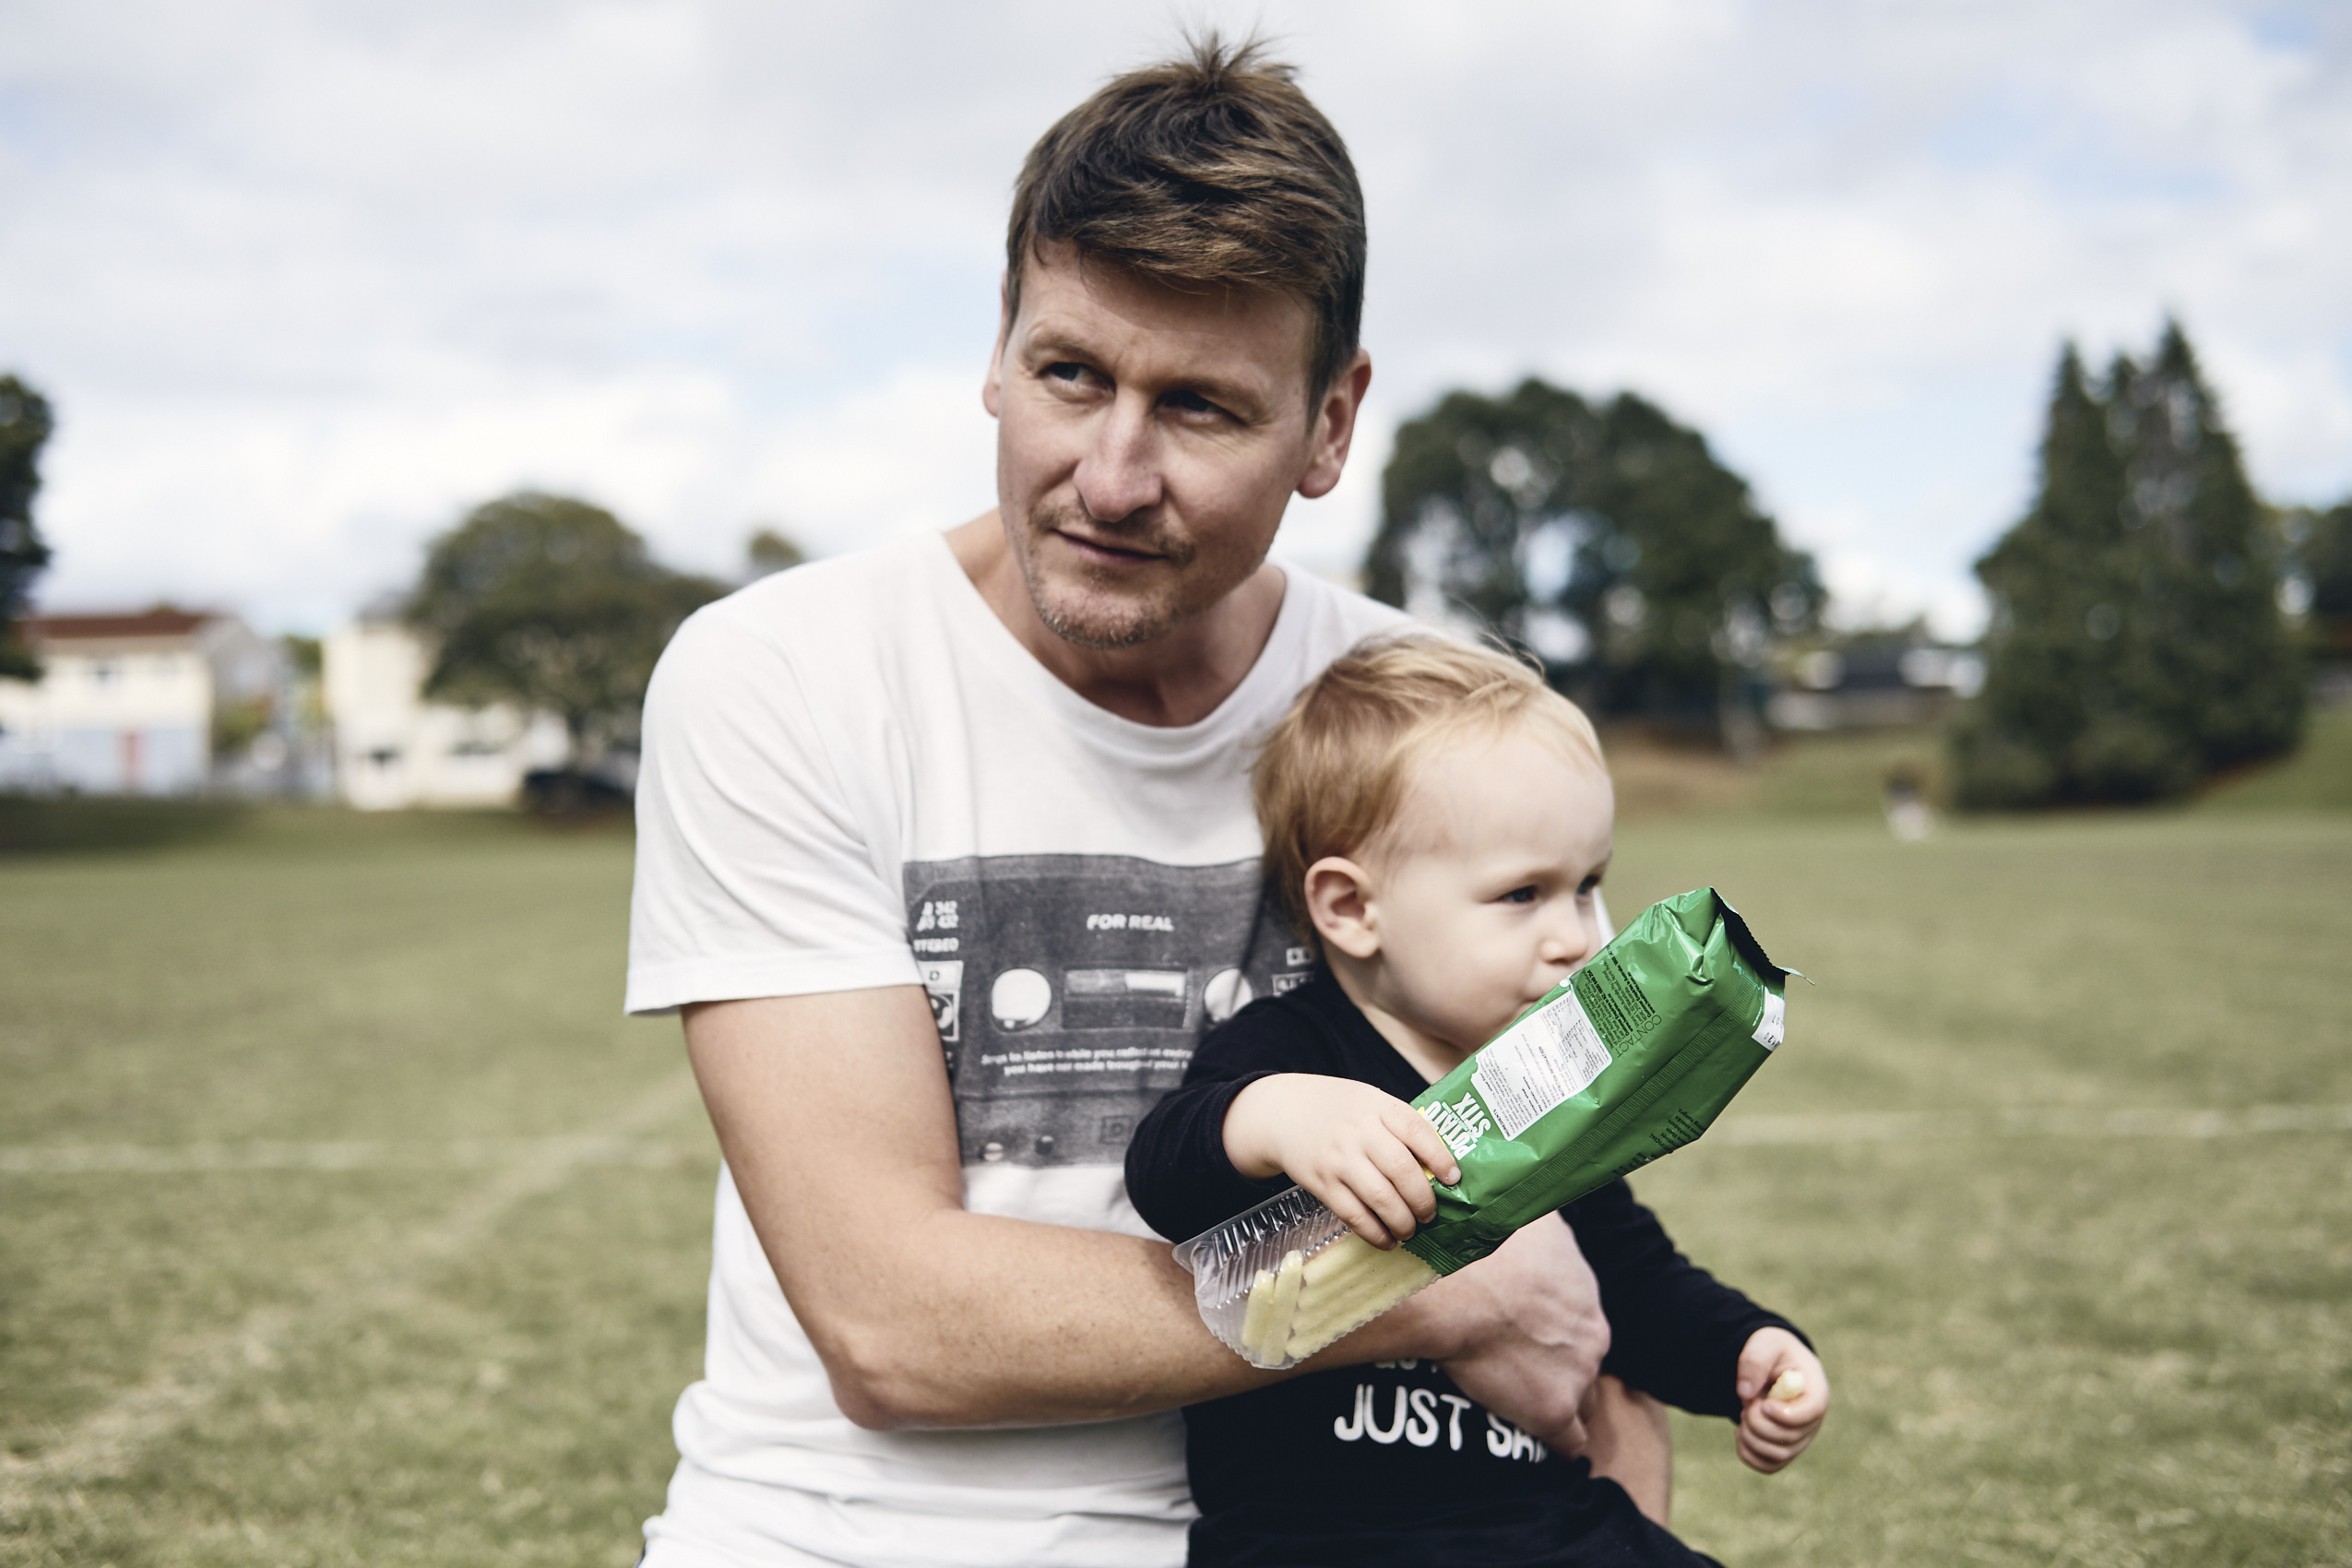 Lockdown • Toddler & Father on School Field with Snacks • Lifestyle & Portrait Photography